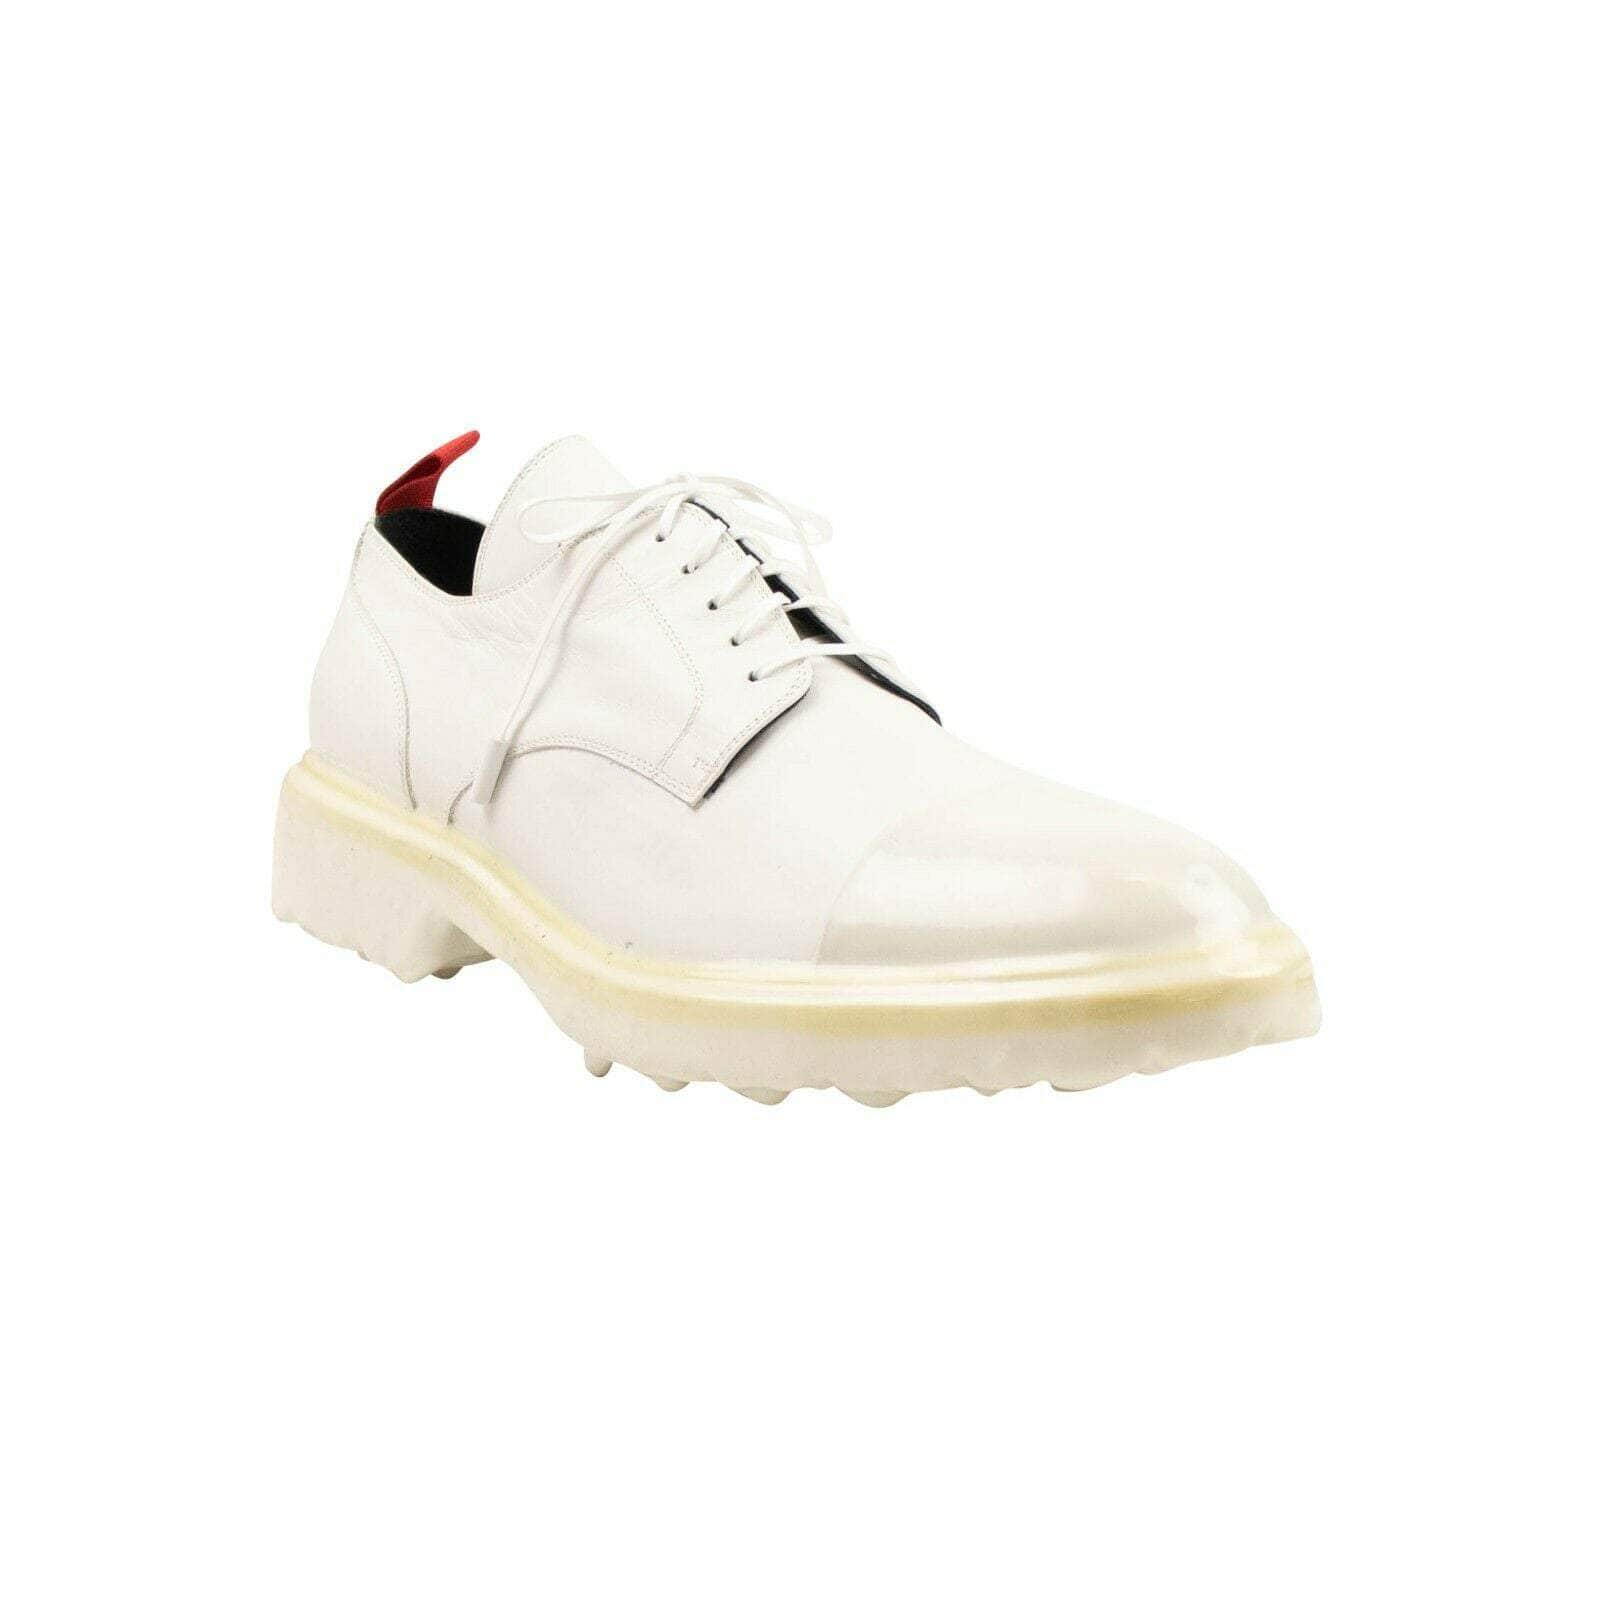 424 ON FAIRFAX 424-on-fairfax, 500-750, channelenable-all, chicmi, couponcollection, gender-mens, main-shoes, mens-shoes, size-41, size-42, size-43, size-44, size-45 White Dipped Low Top Sneakers